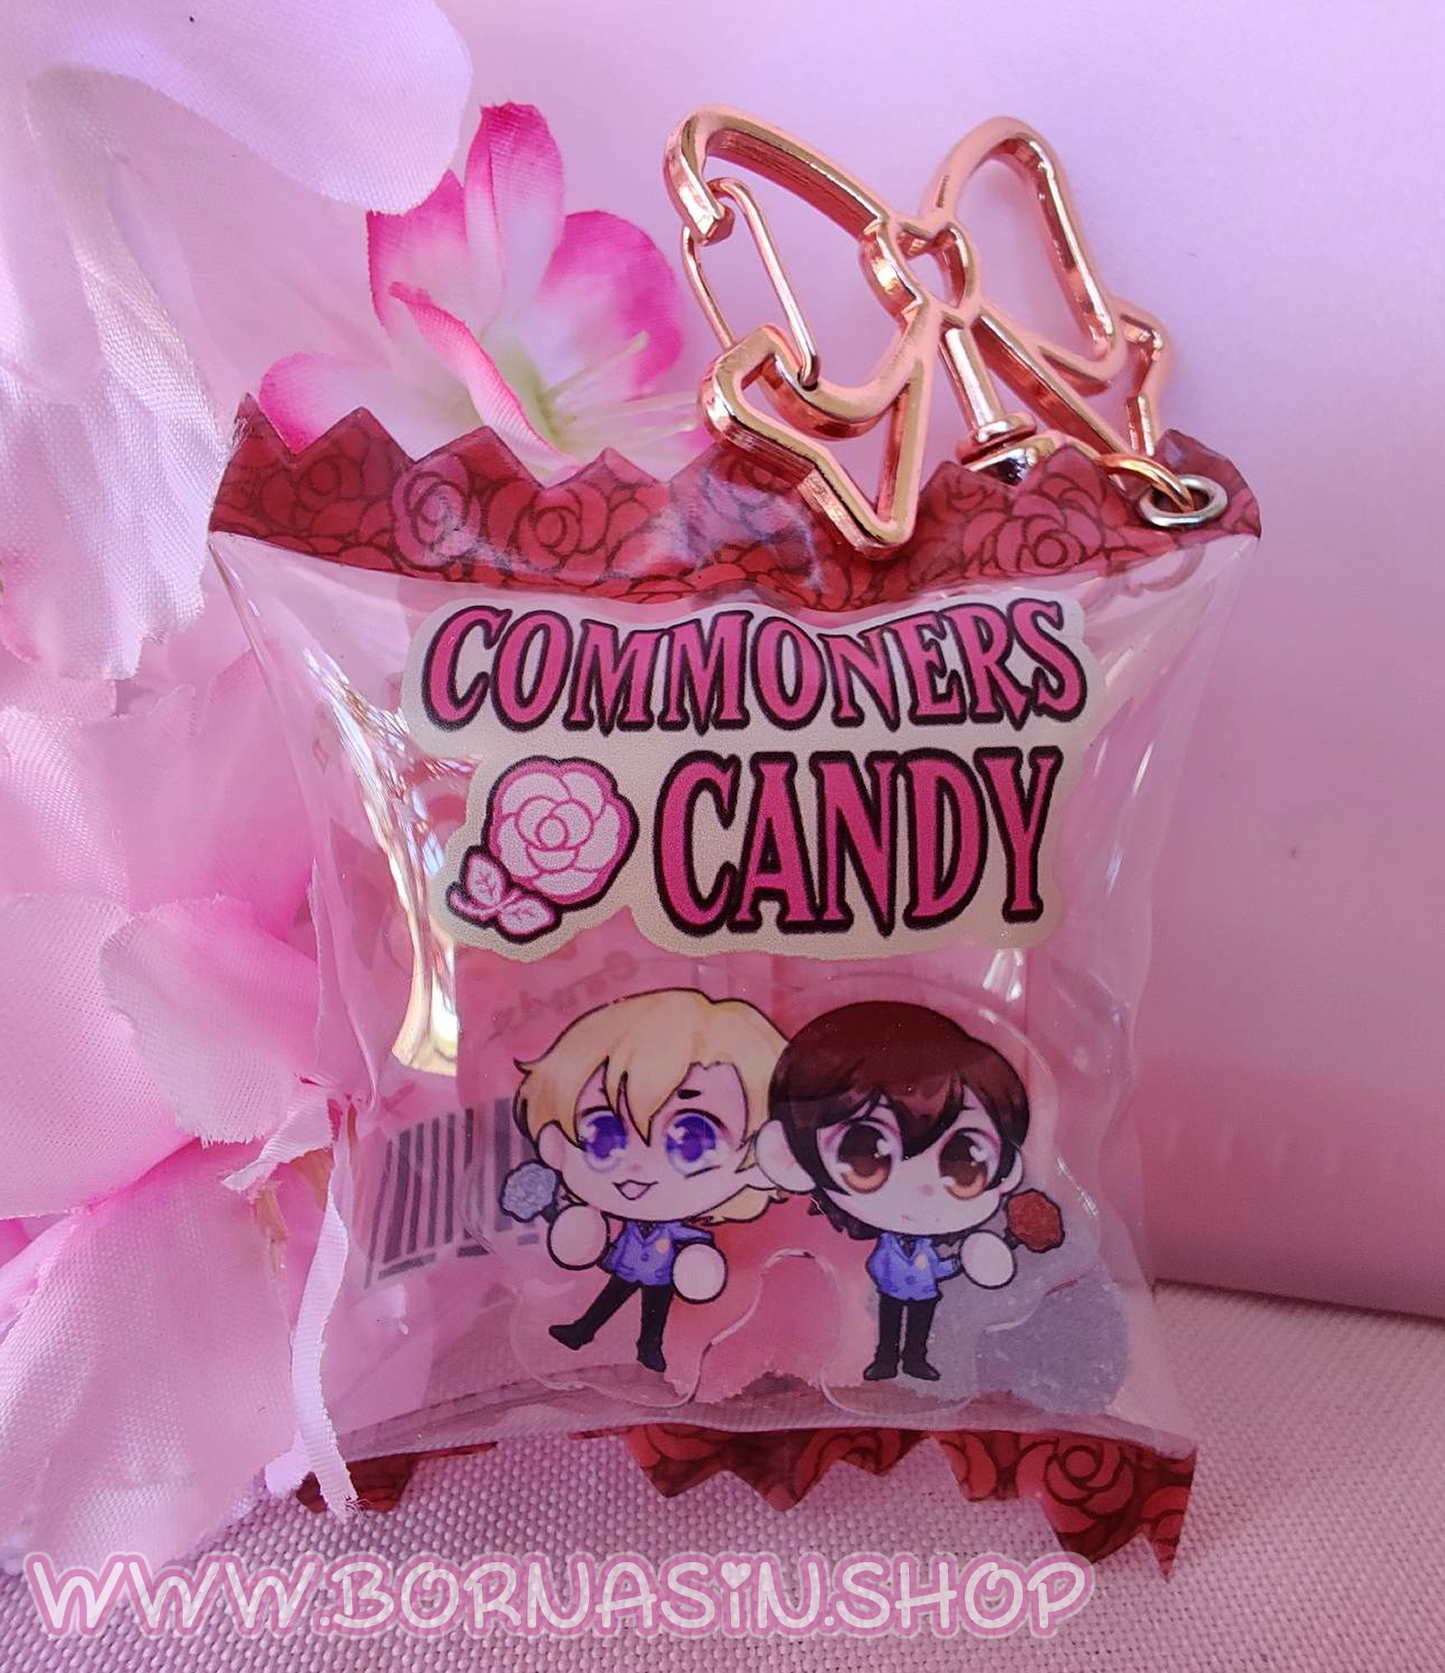 Commoners Candy 3d Candy Bag Charm